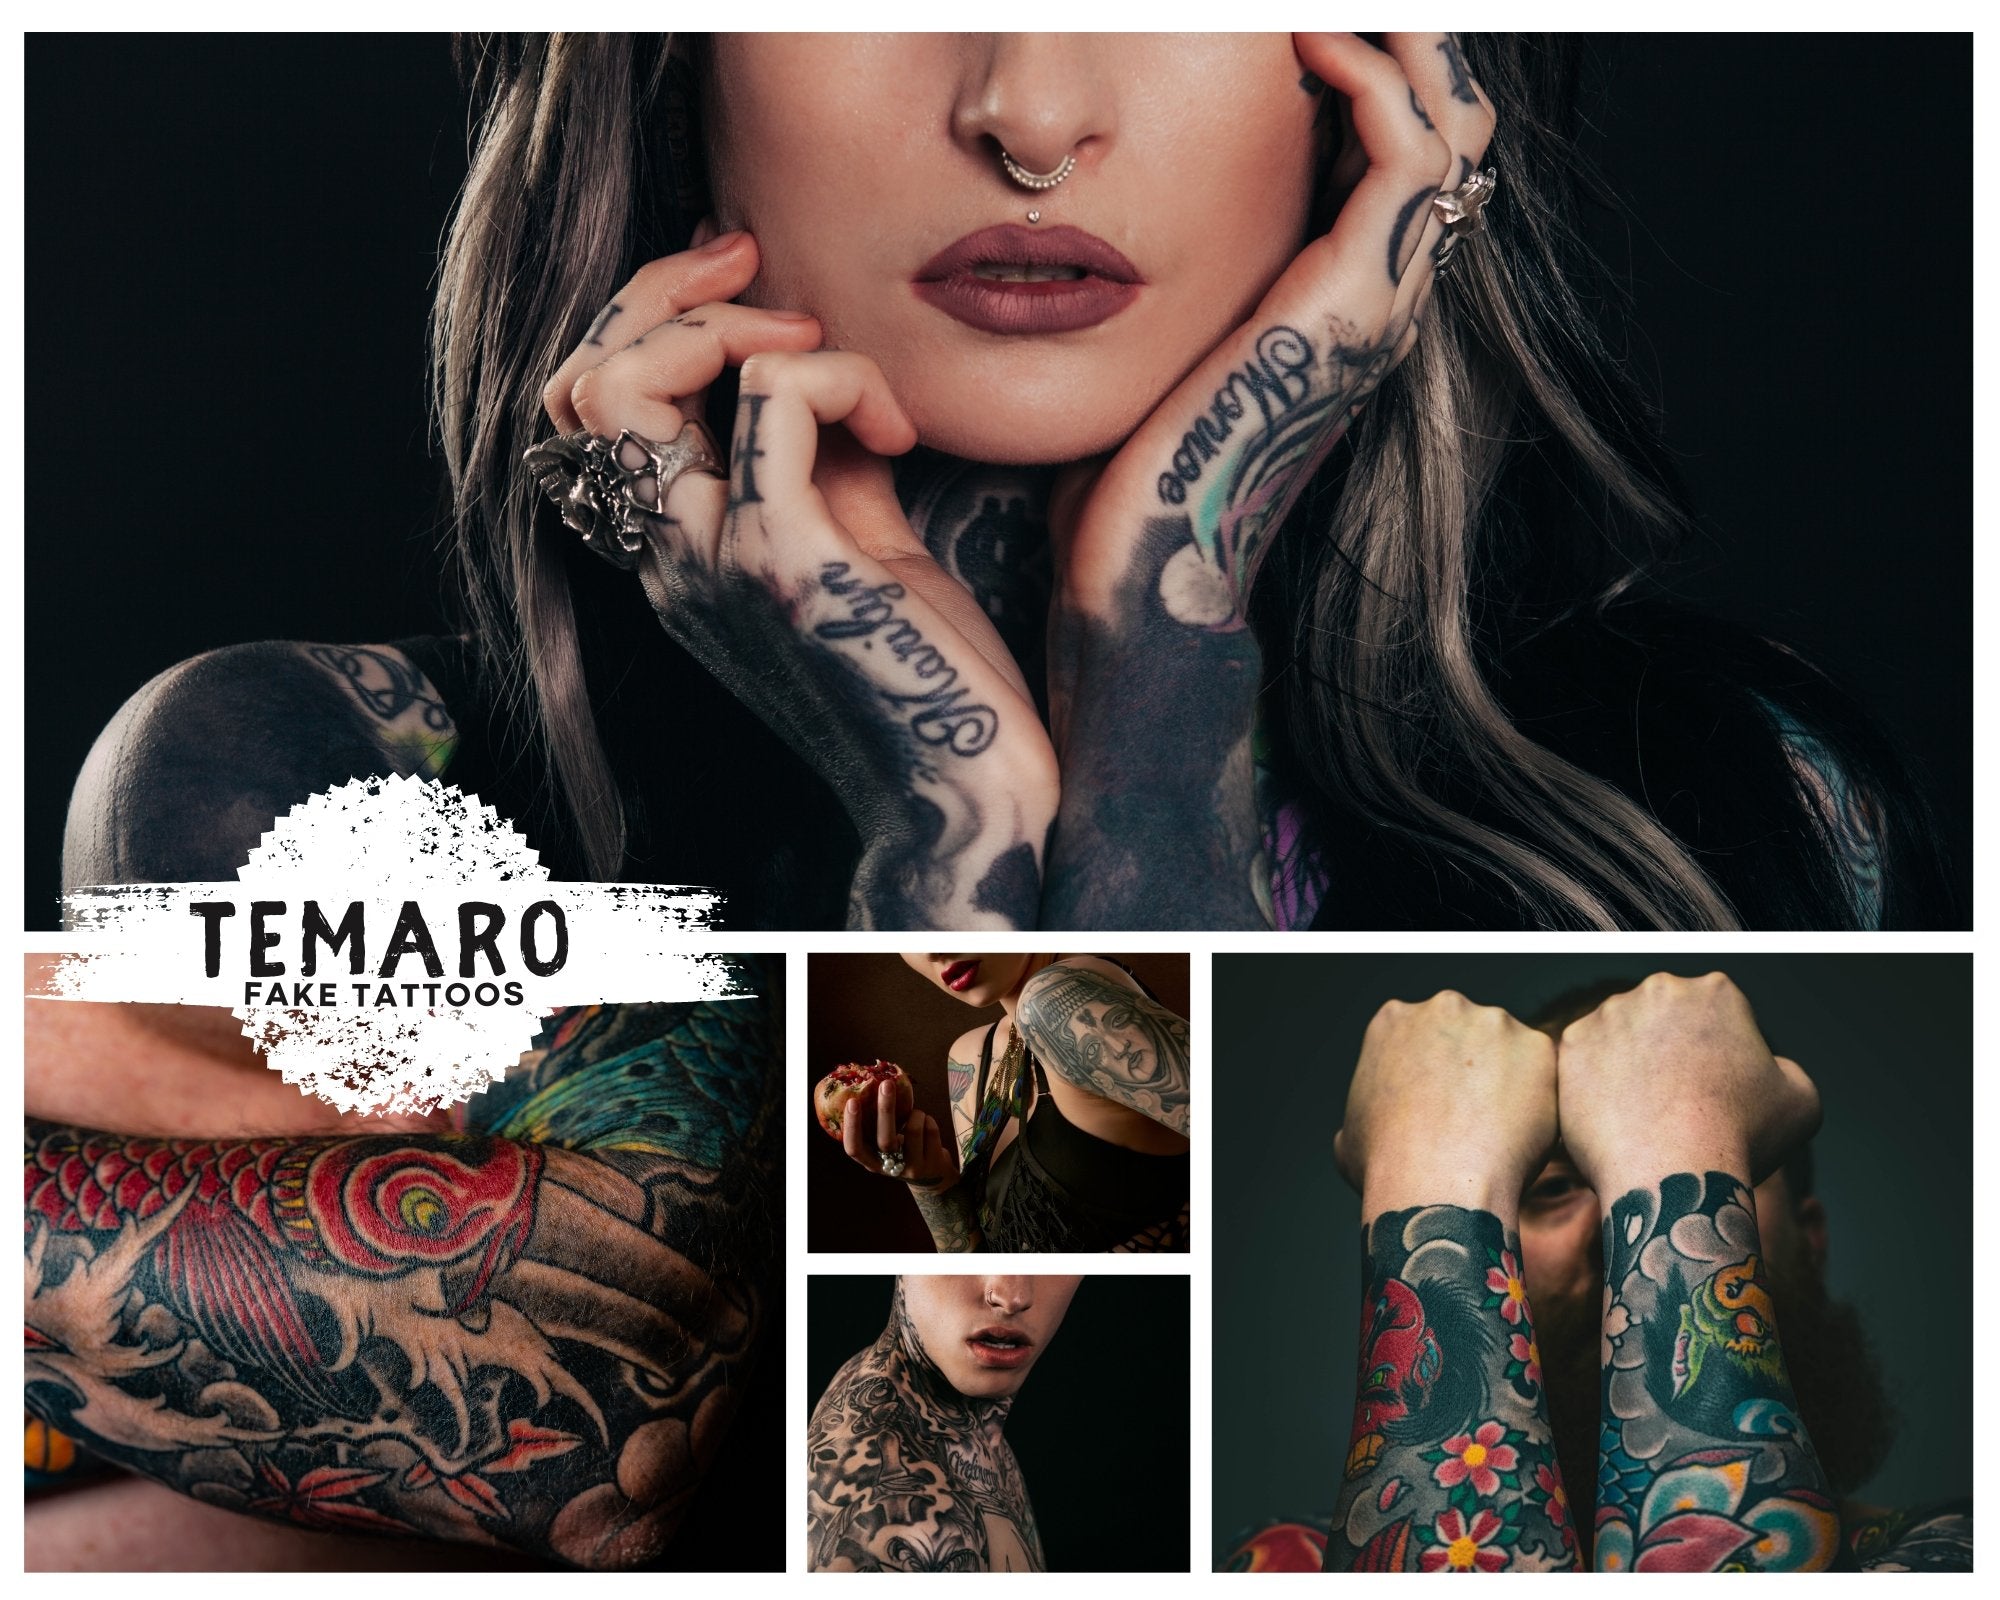 Temaro Temporary Tattoos South Africa - Where to buy temporary tattoos near  me? TeMaRo Temporary Tattoos in Kempton Park Johannesburg is where you can  find a variety of stunning temporary tattoos near